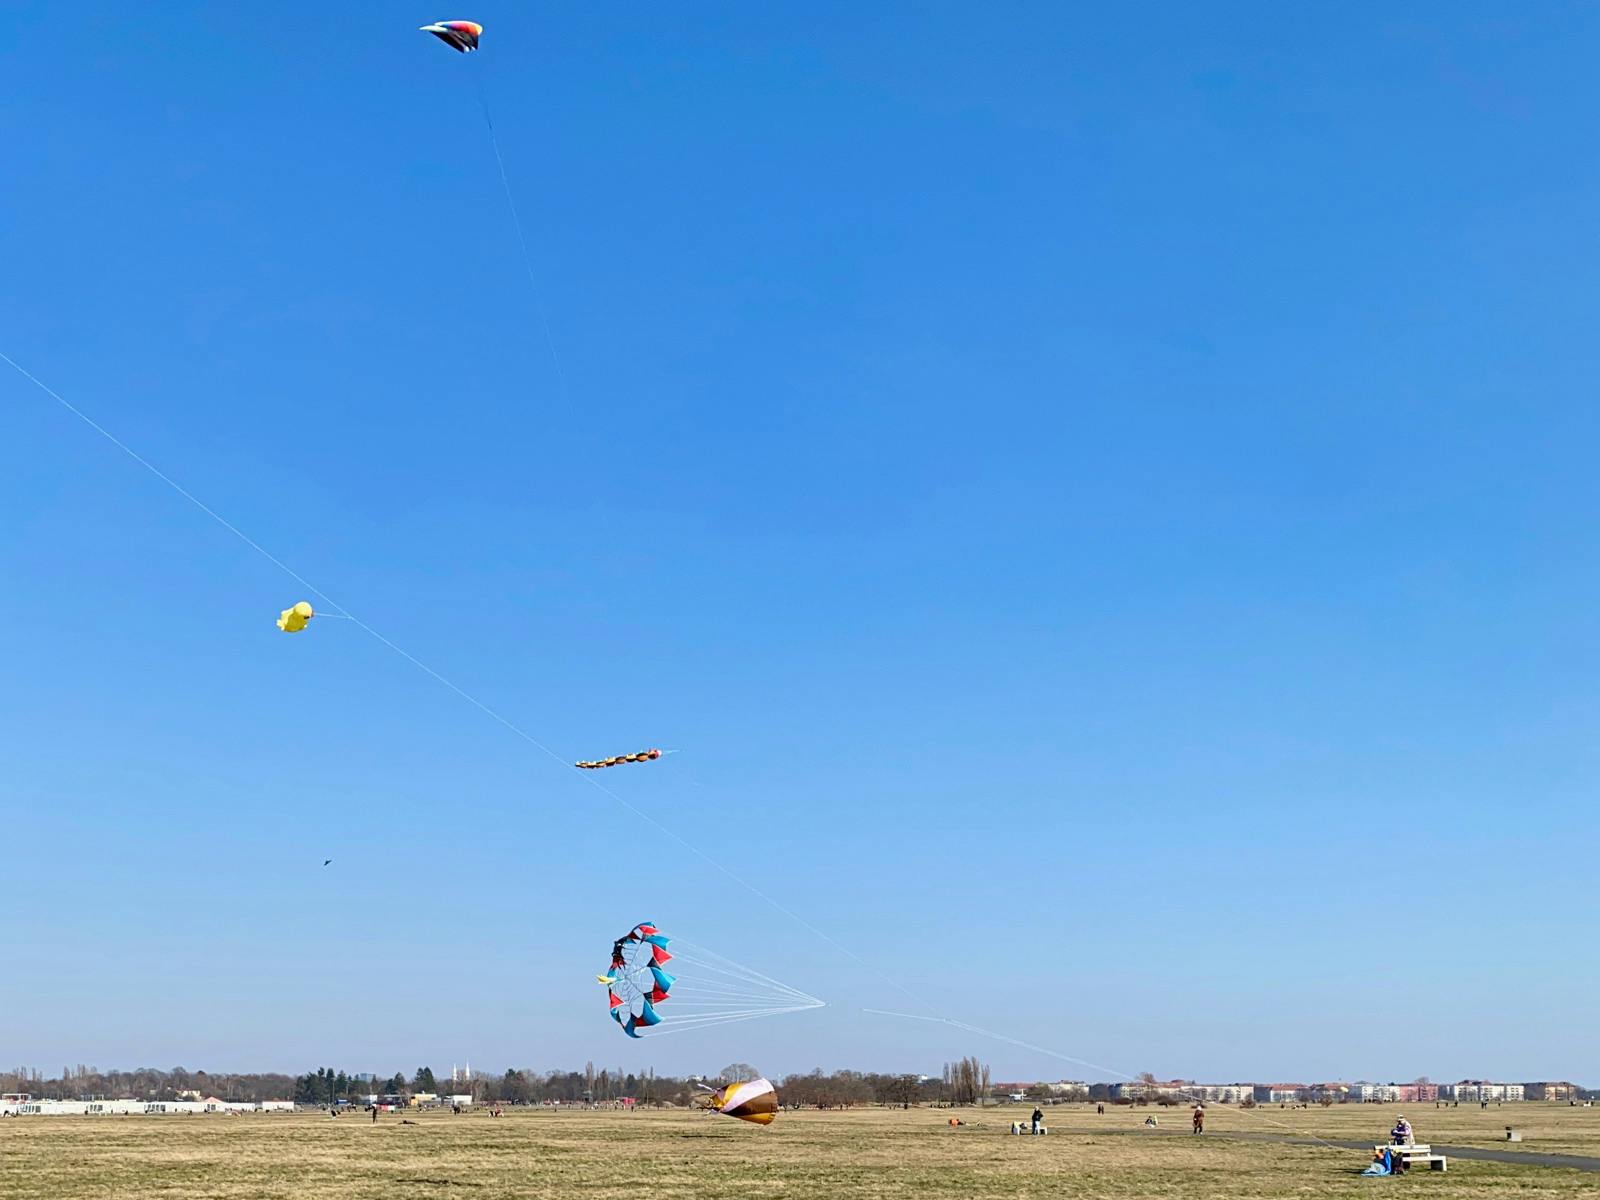 A passive kite flyer sits on a bench while 4 different kites fly in front and above them.